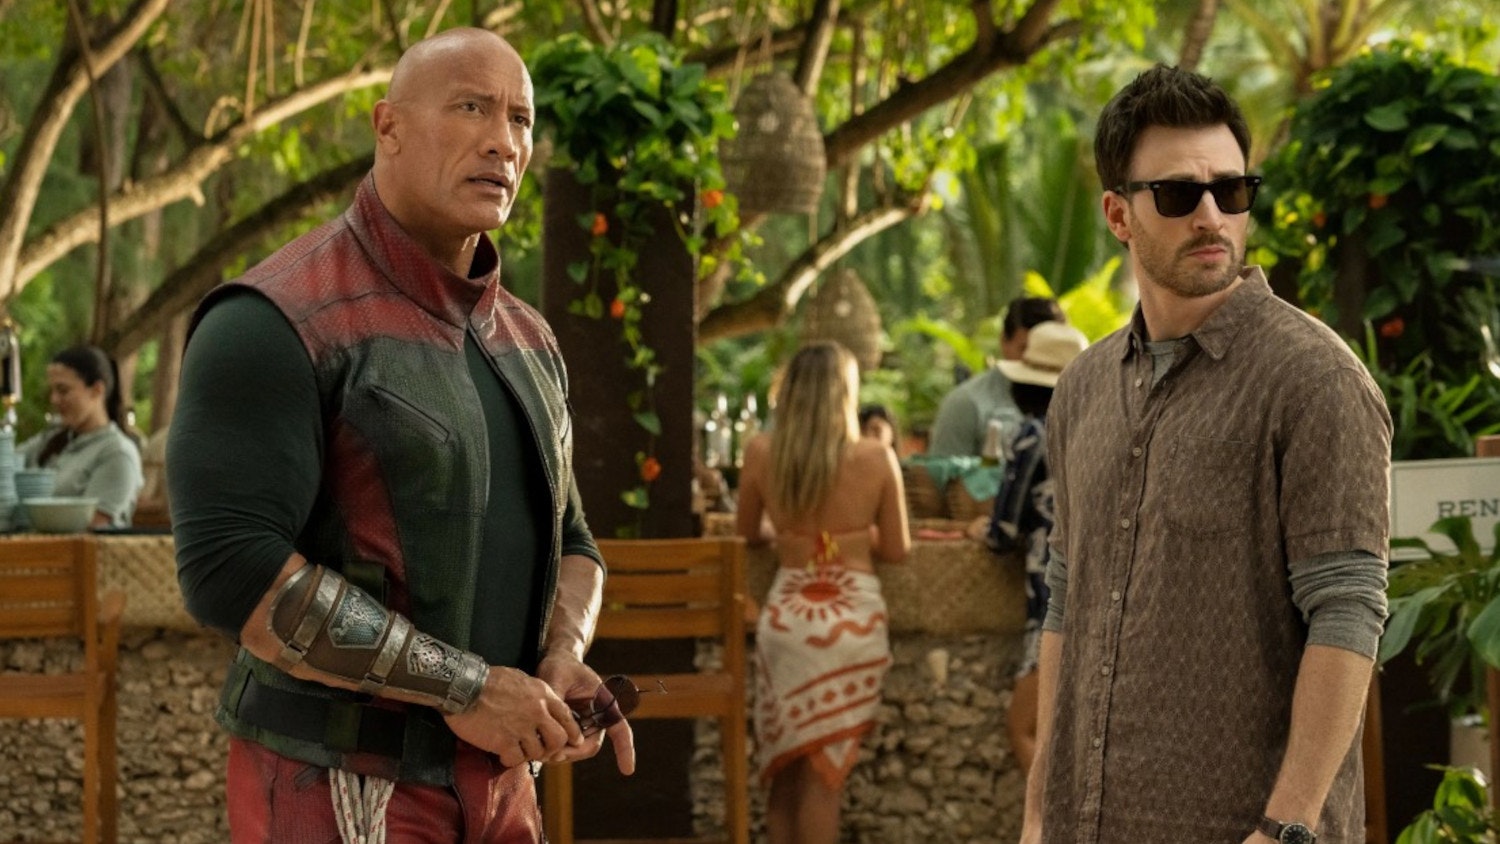 Dwayne Johnson and Chris Evans search for Santa Claus in the Red One trailer